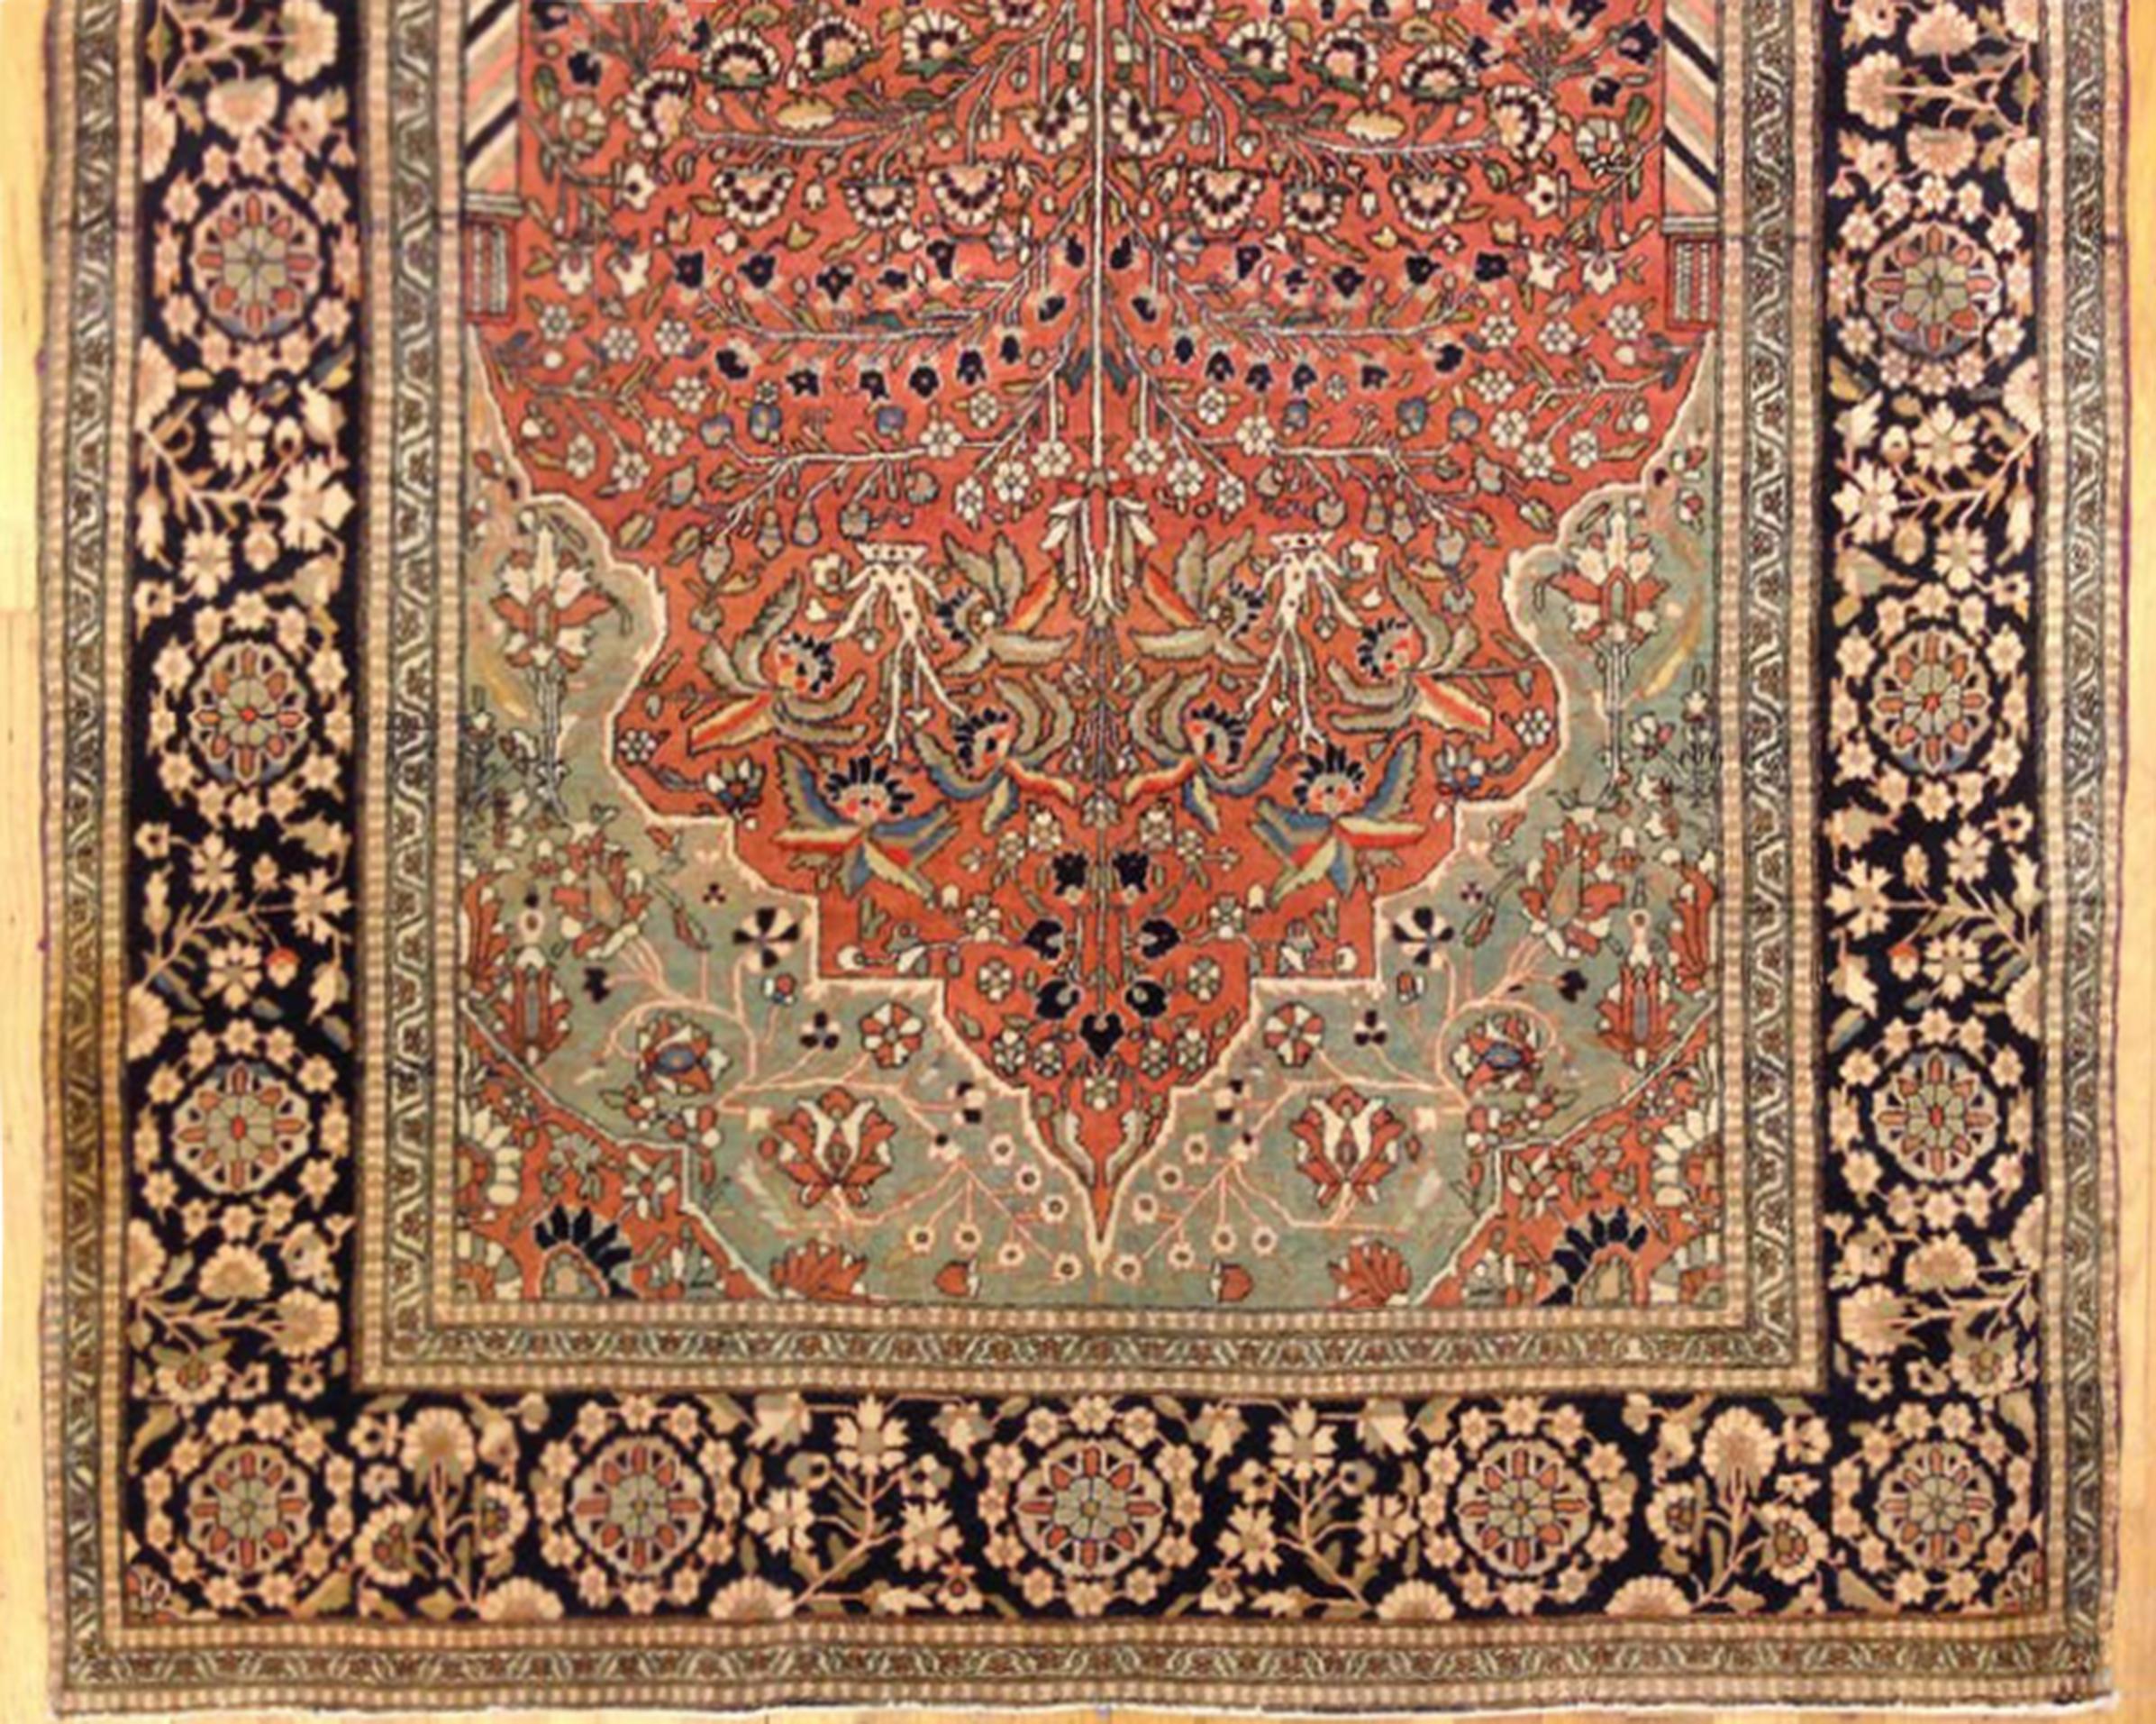 Antique Persian Mohtesham Kashan Rug, Small Size with Lantern Design, circa 1890 In Good Condition For Sale In New York, NY